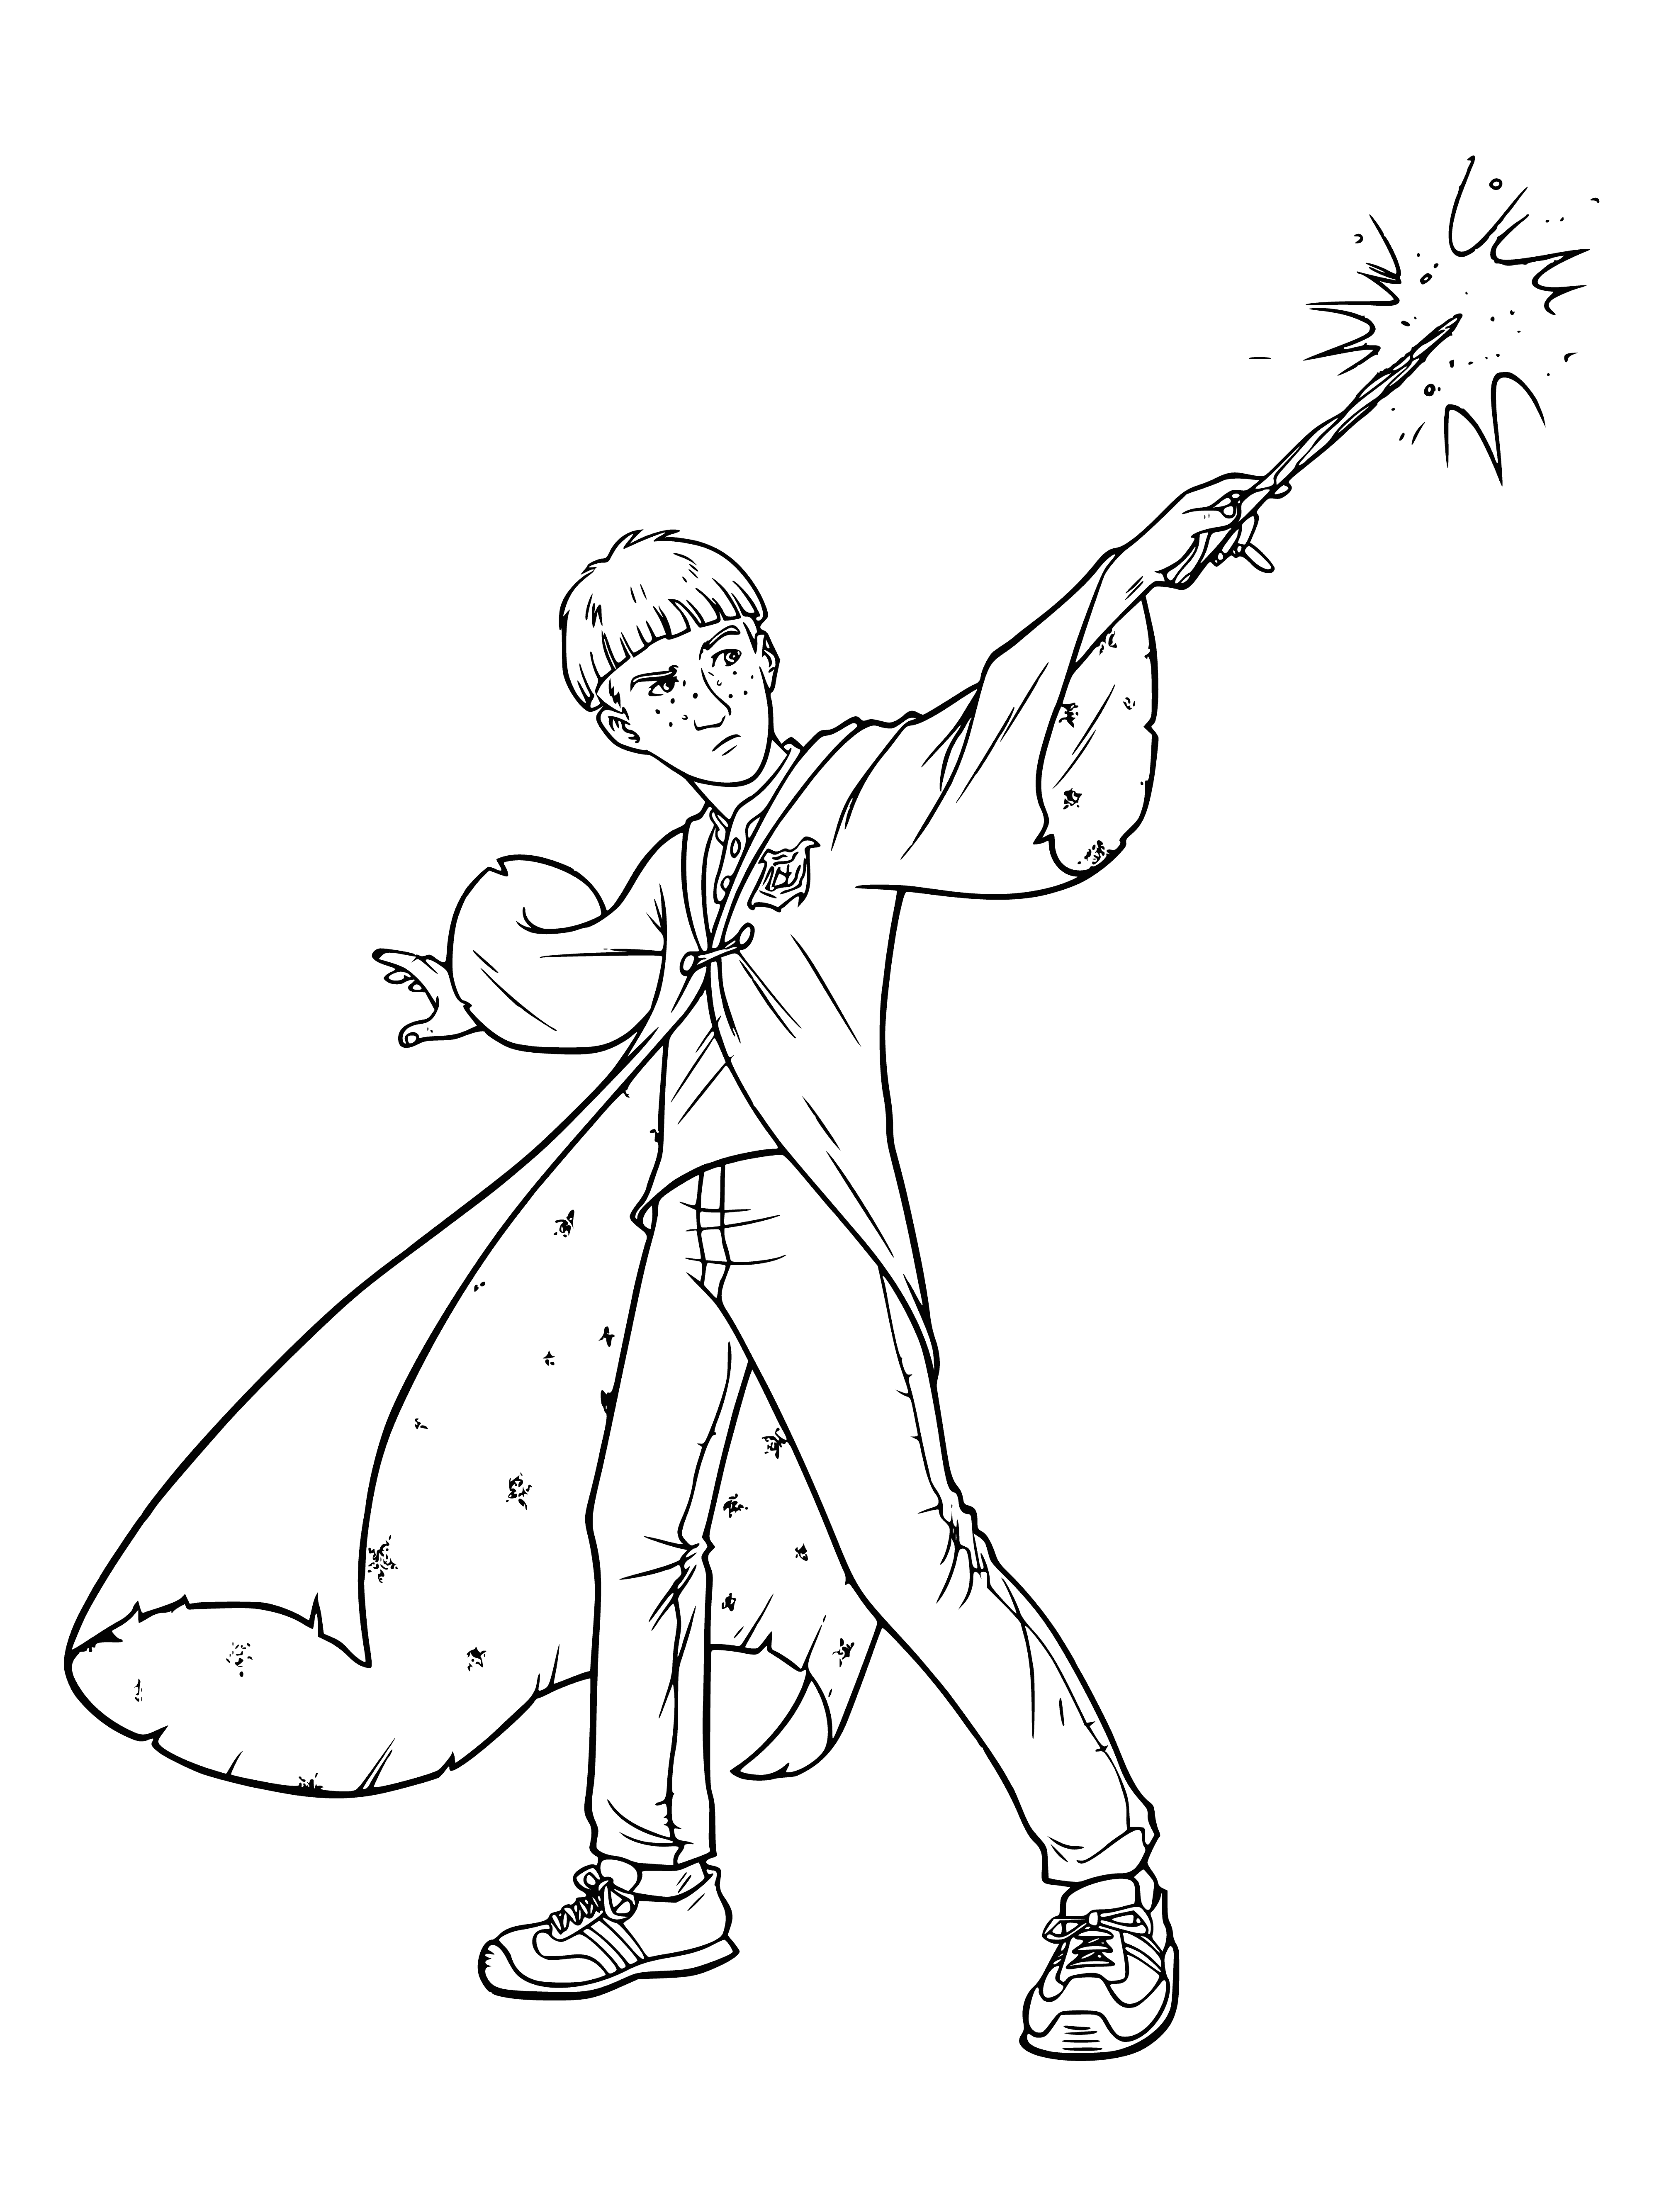 coloring page: Boy in black robe holds wand, looking serious while sitting in dimly lit window. #HarryPotter #ColoringPage